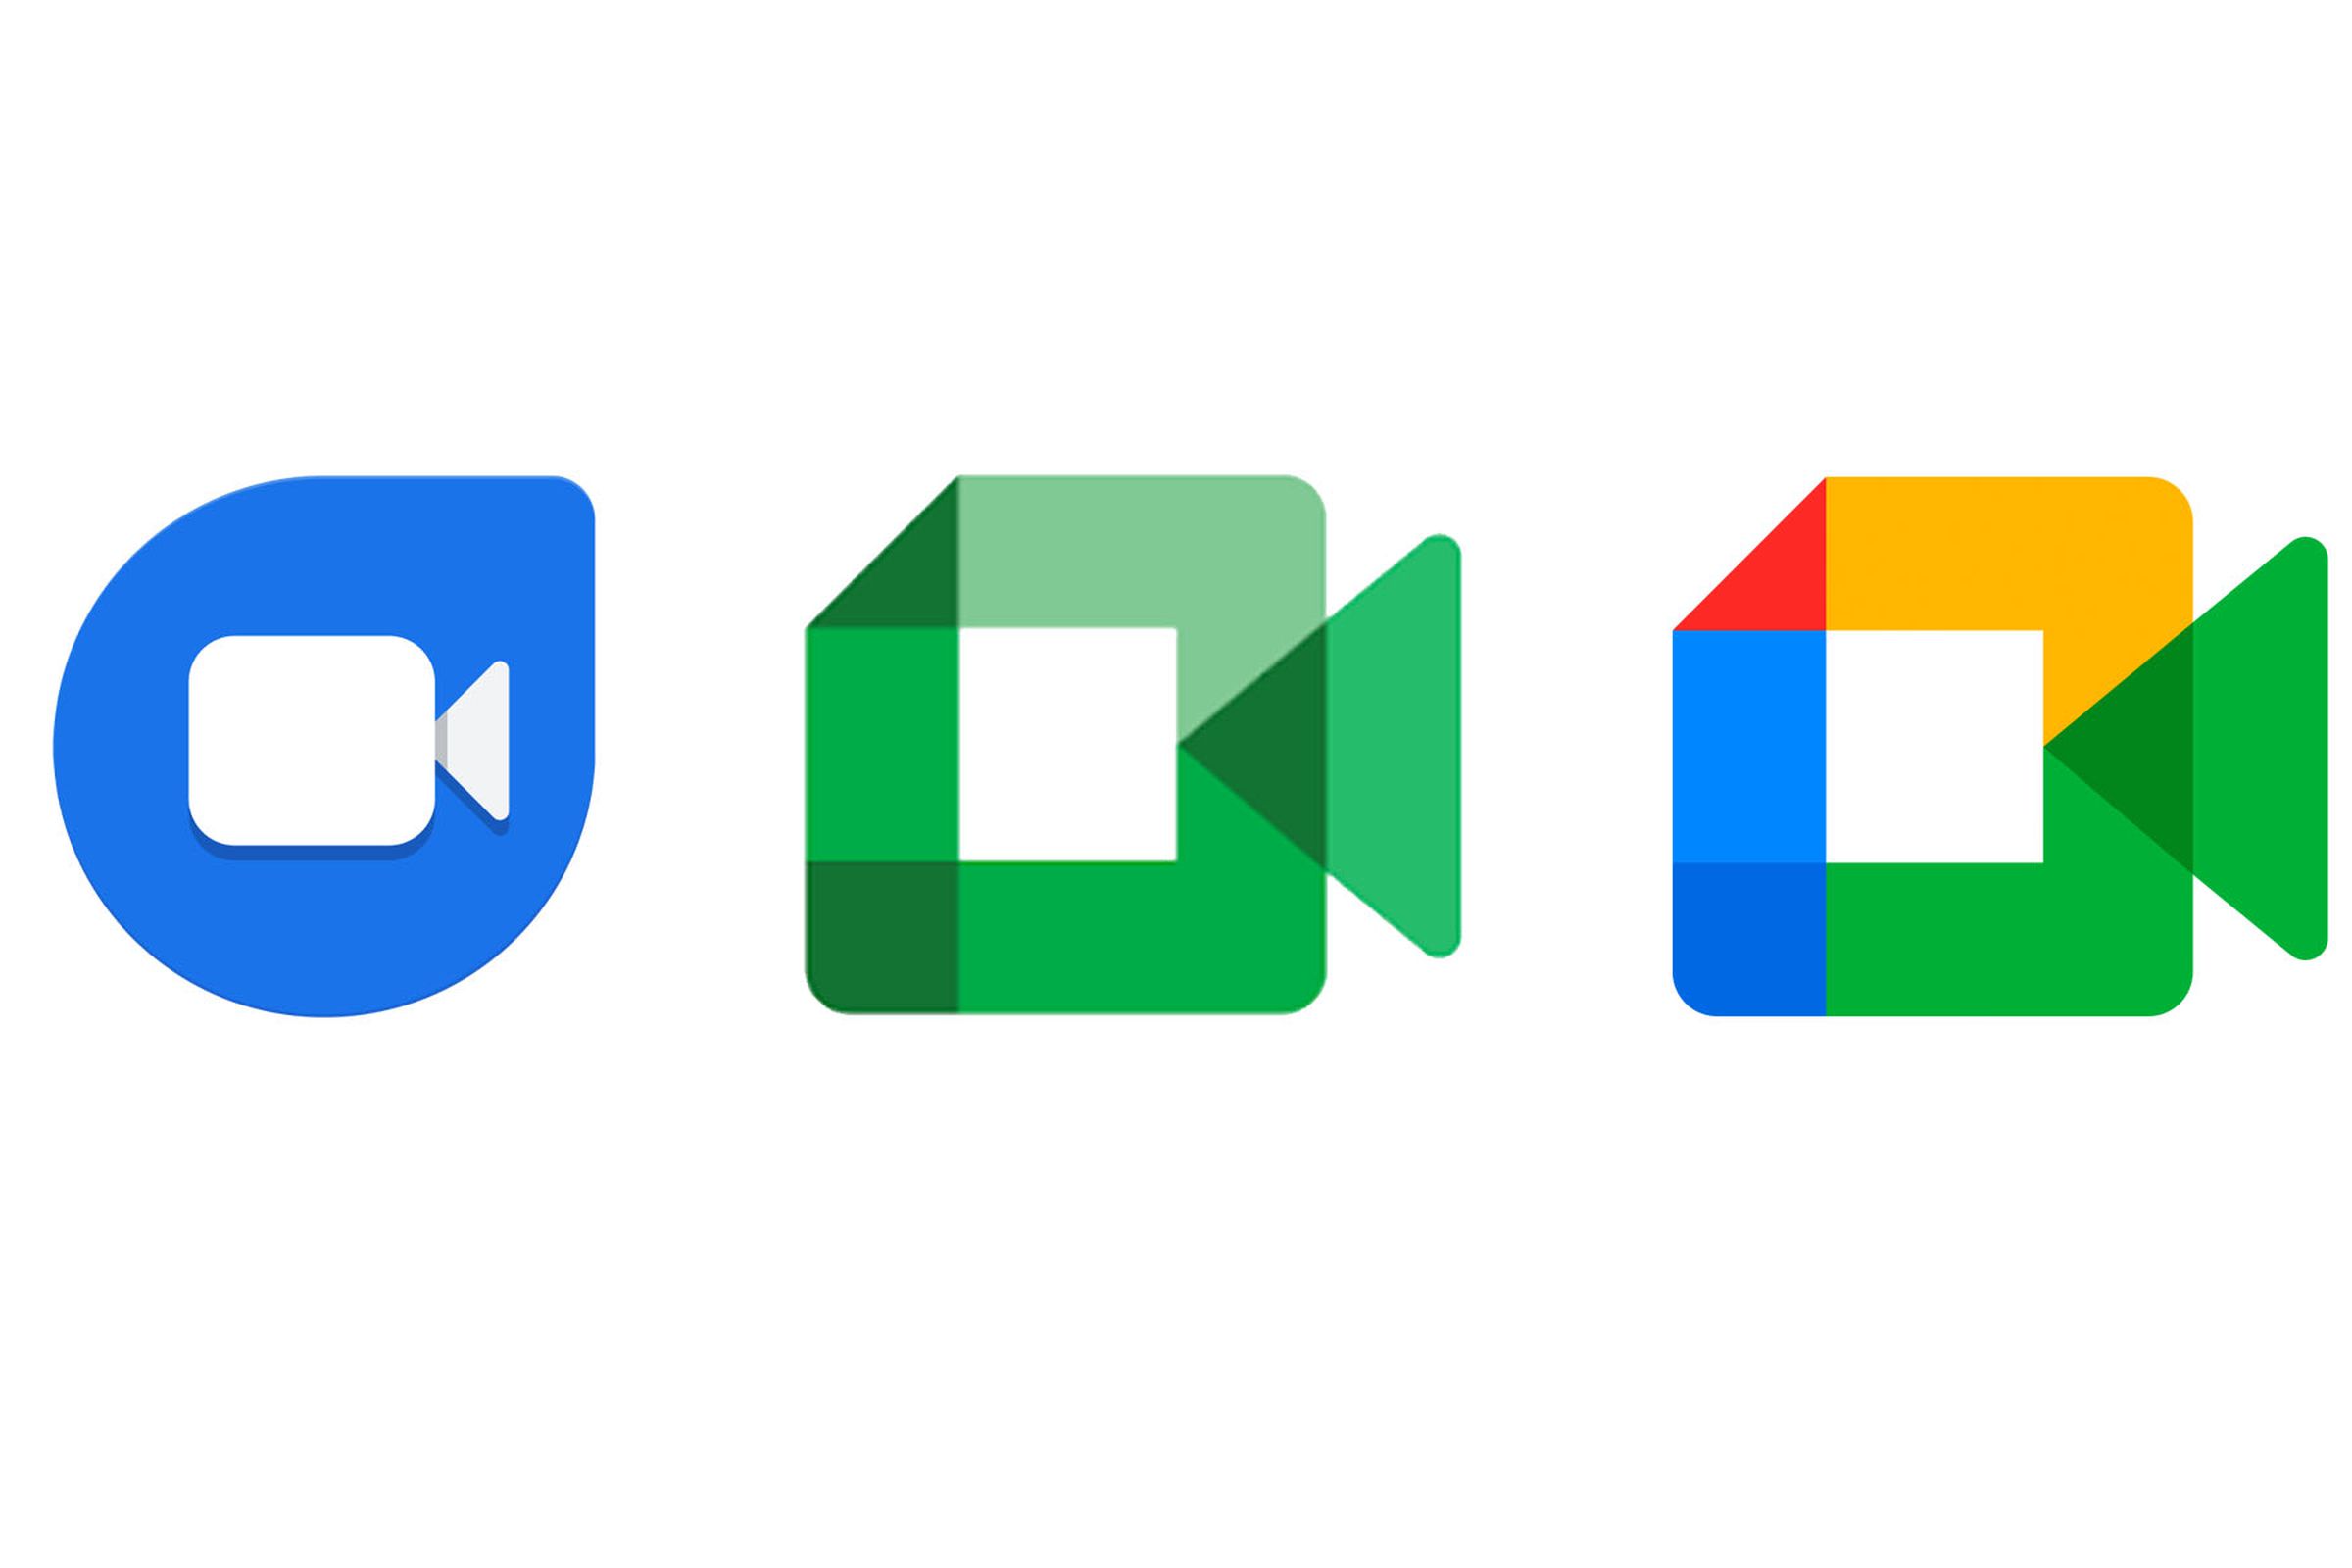 The logo for Google Duo, Meet Original, and Meet (from left to right).